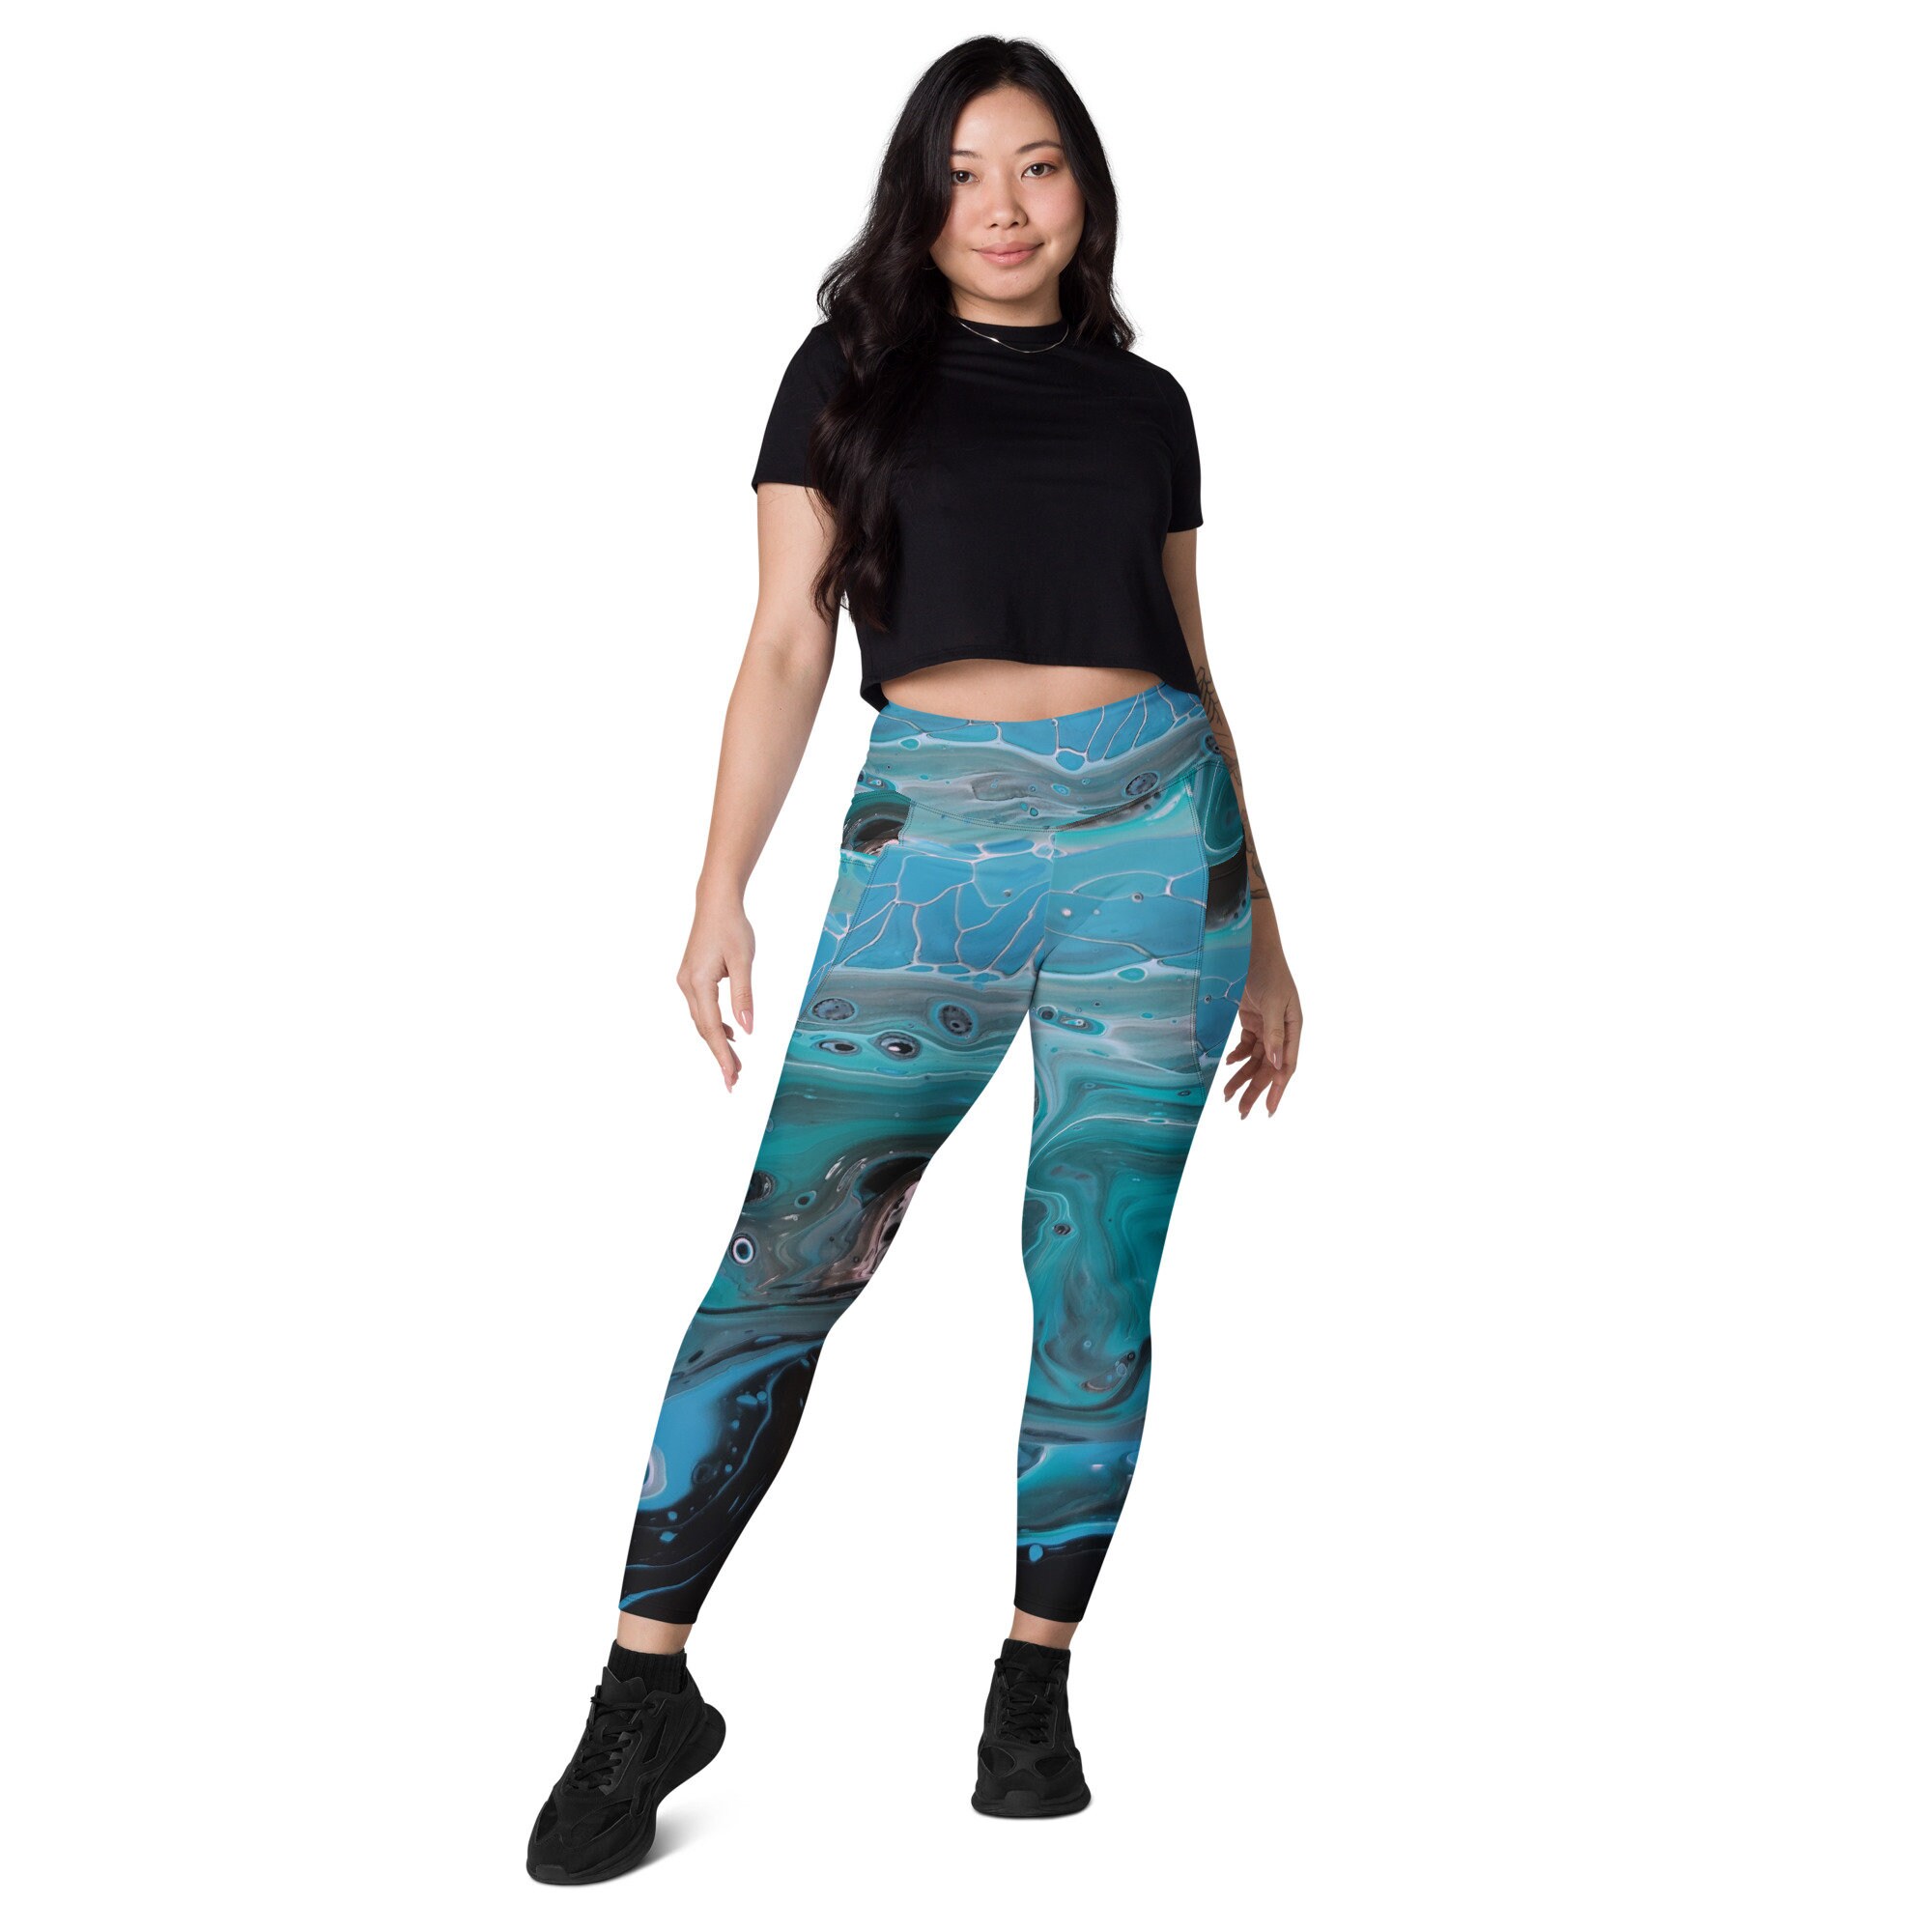 Serenity in Bloom Floral Printed Leggings Perfect for Yoga and